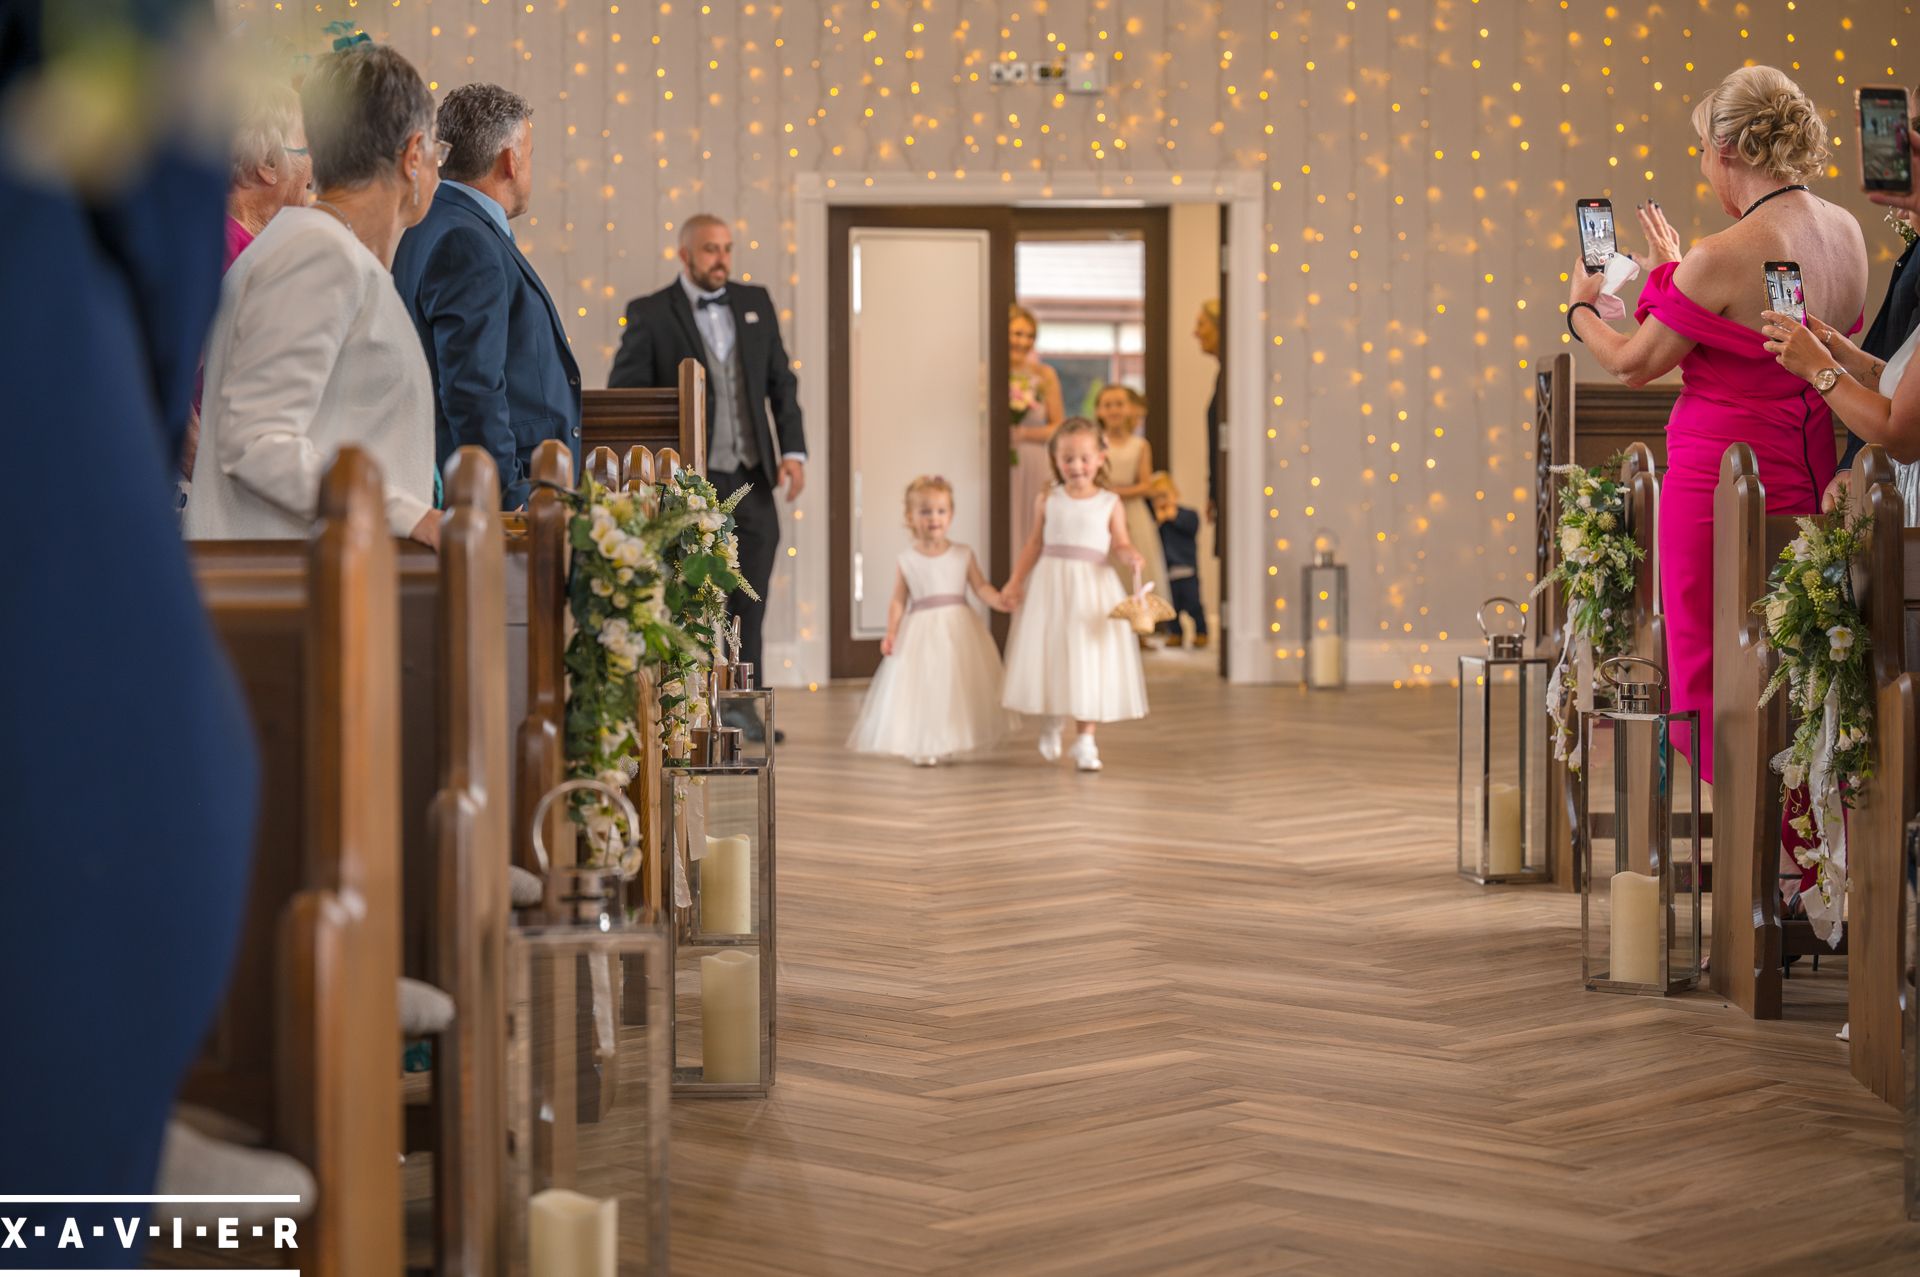 flowergirls are walking down the aisle